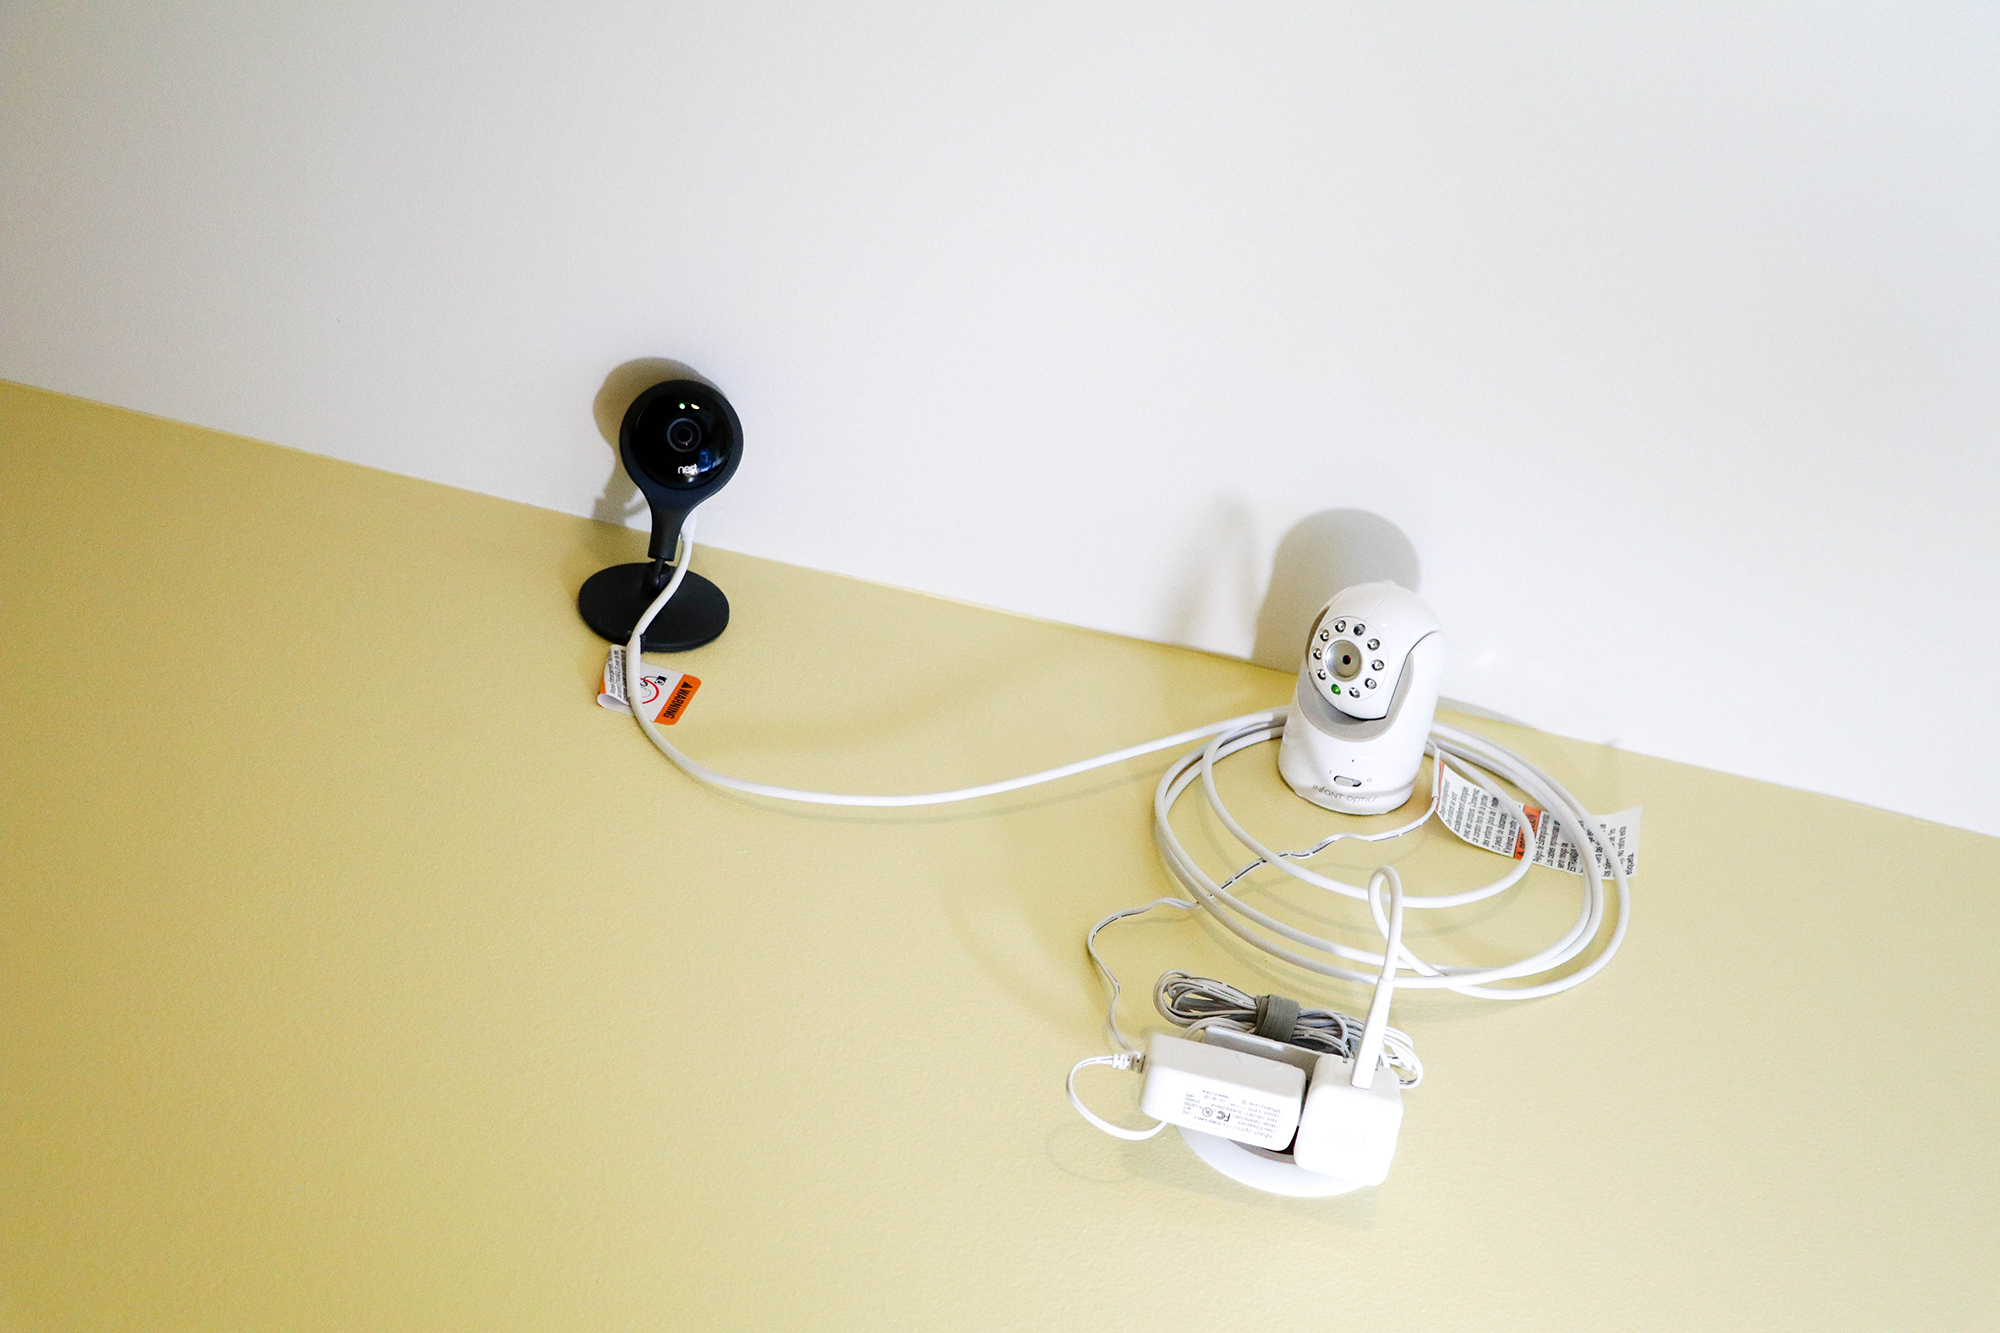 How to hide power cords from curious baby! - crafterhours